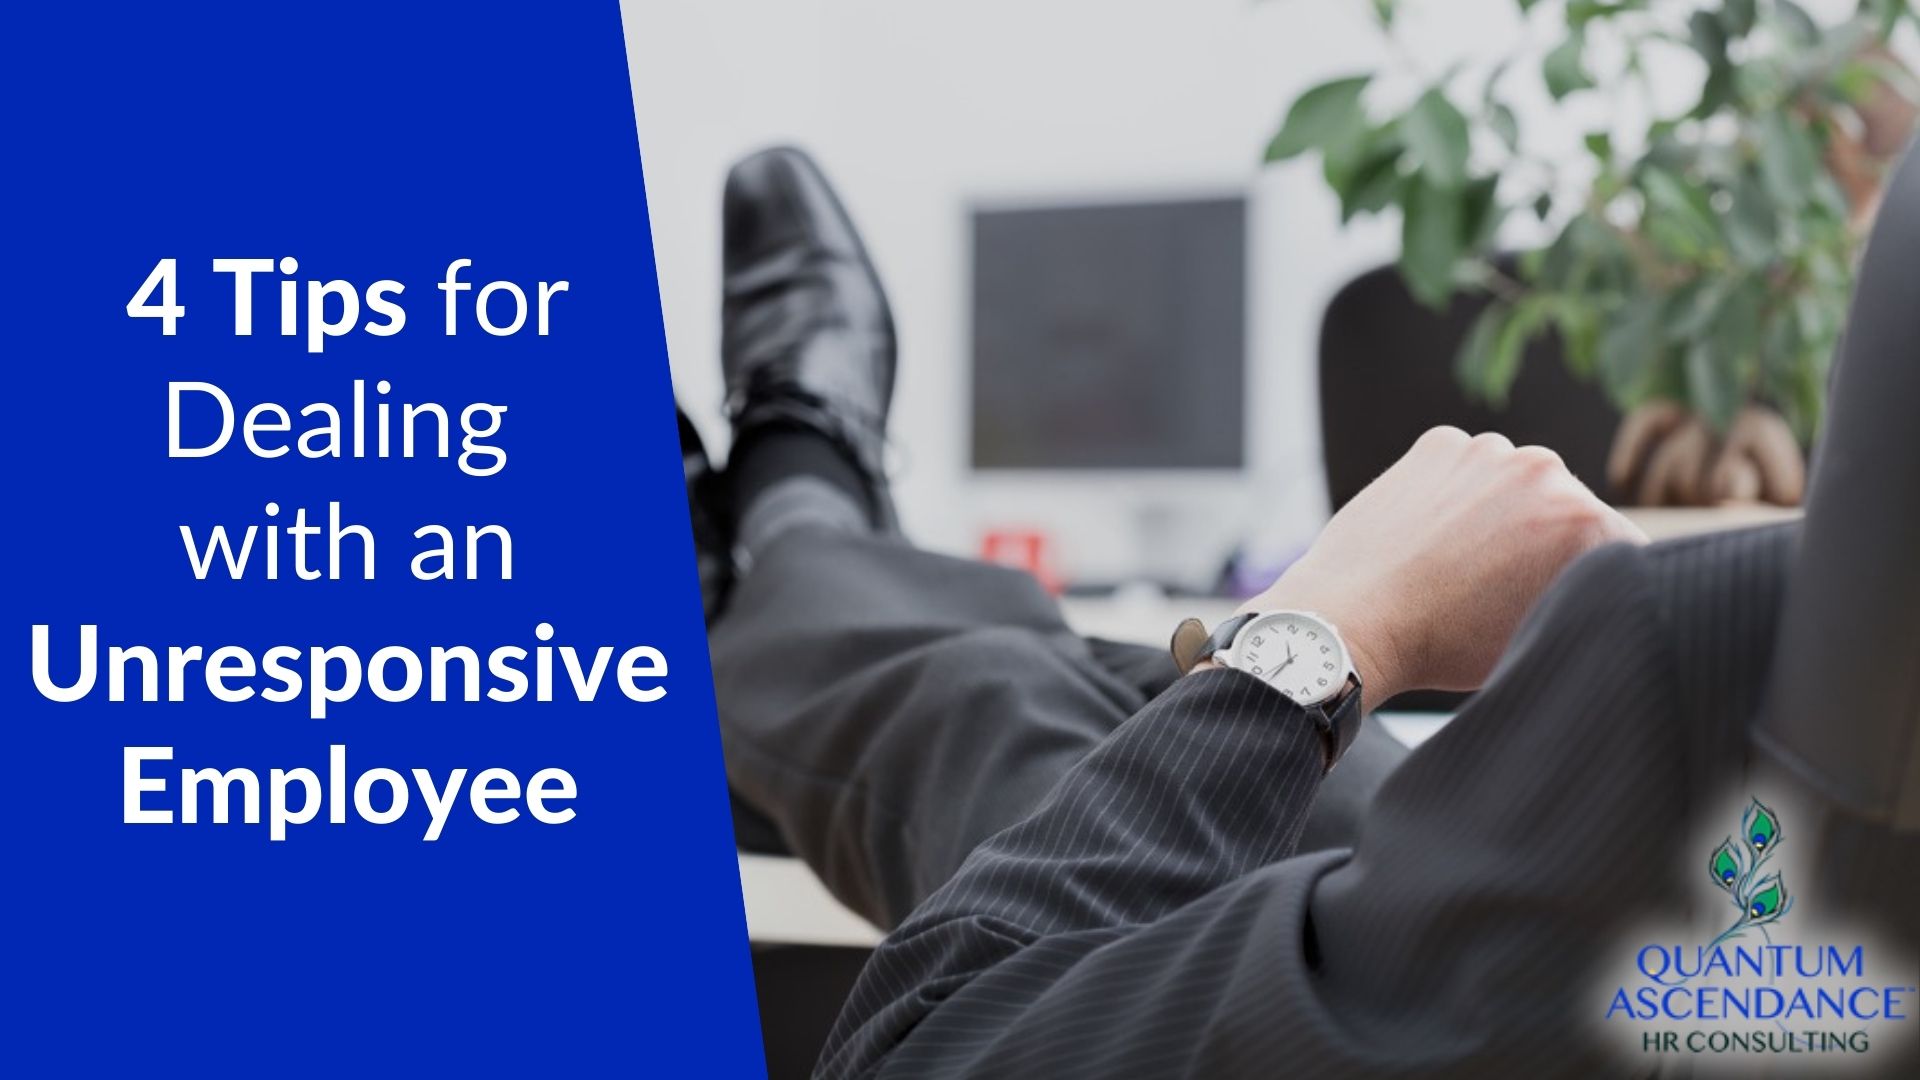 4 Tips for Dealing with an Unresponsive Employee